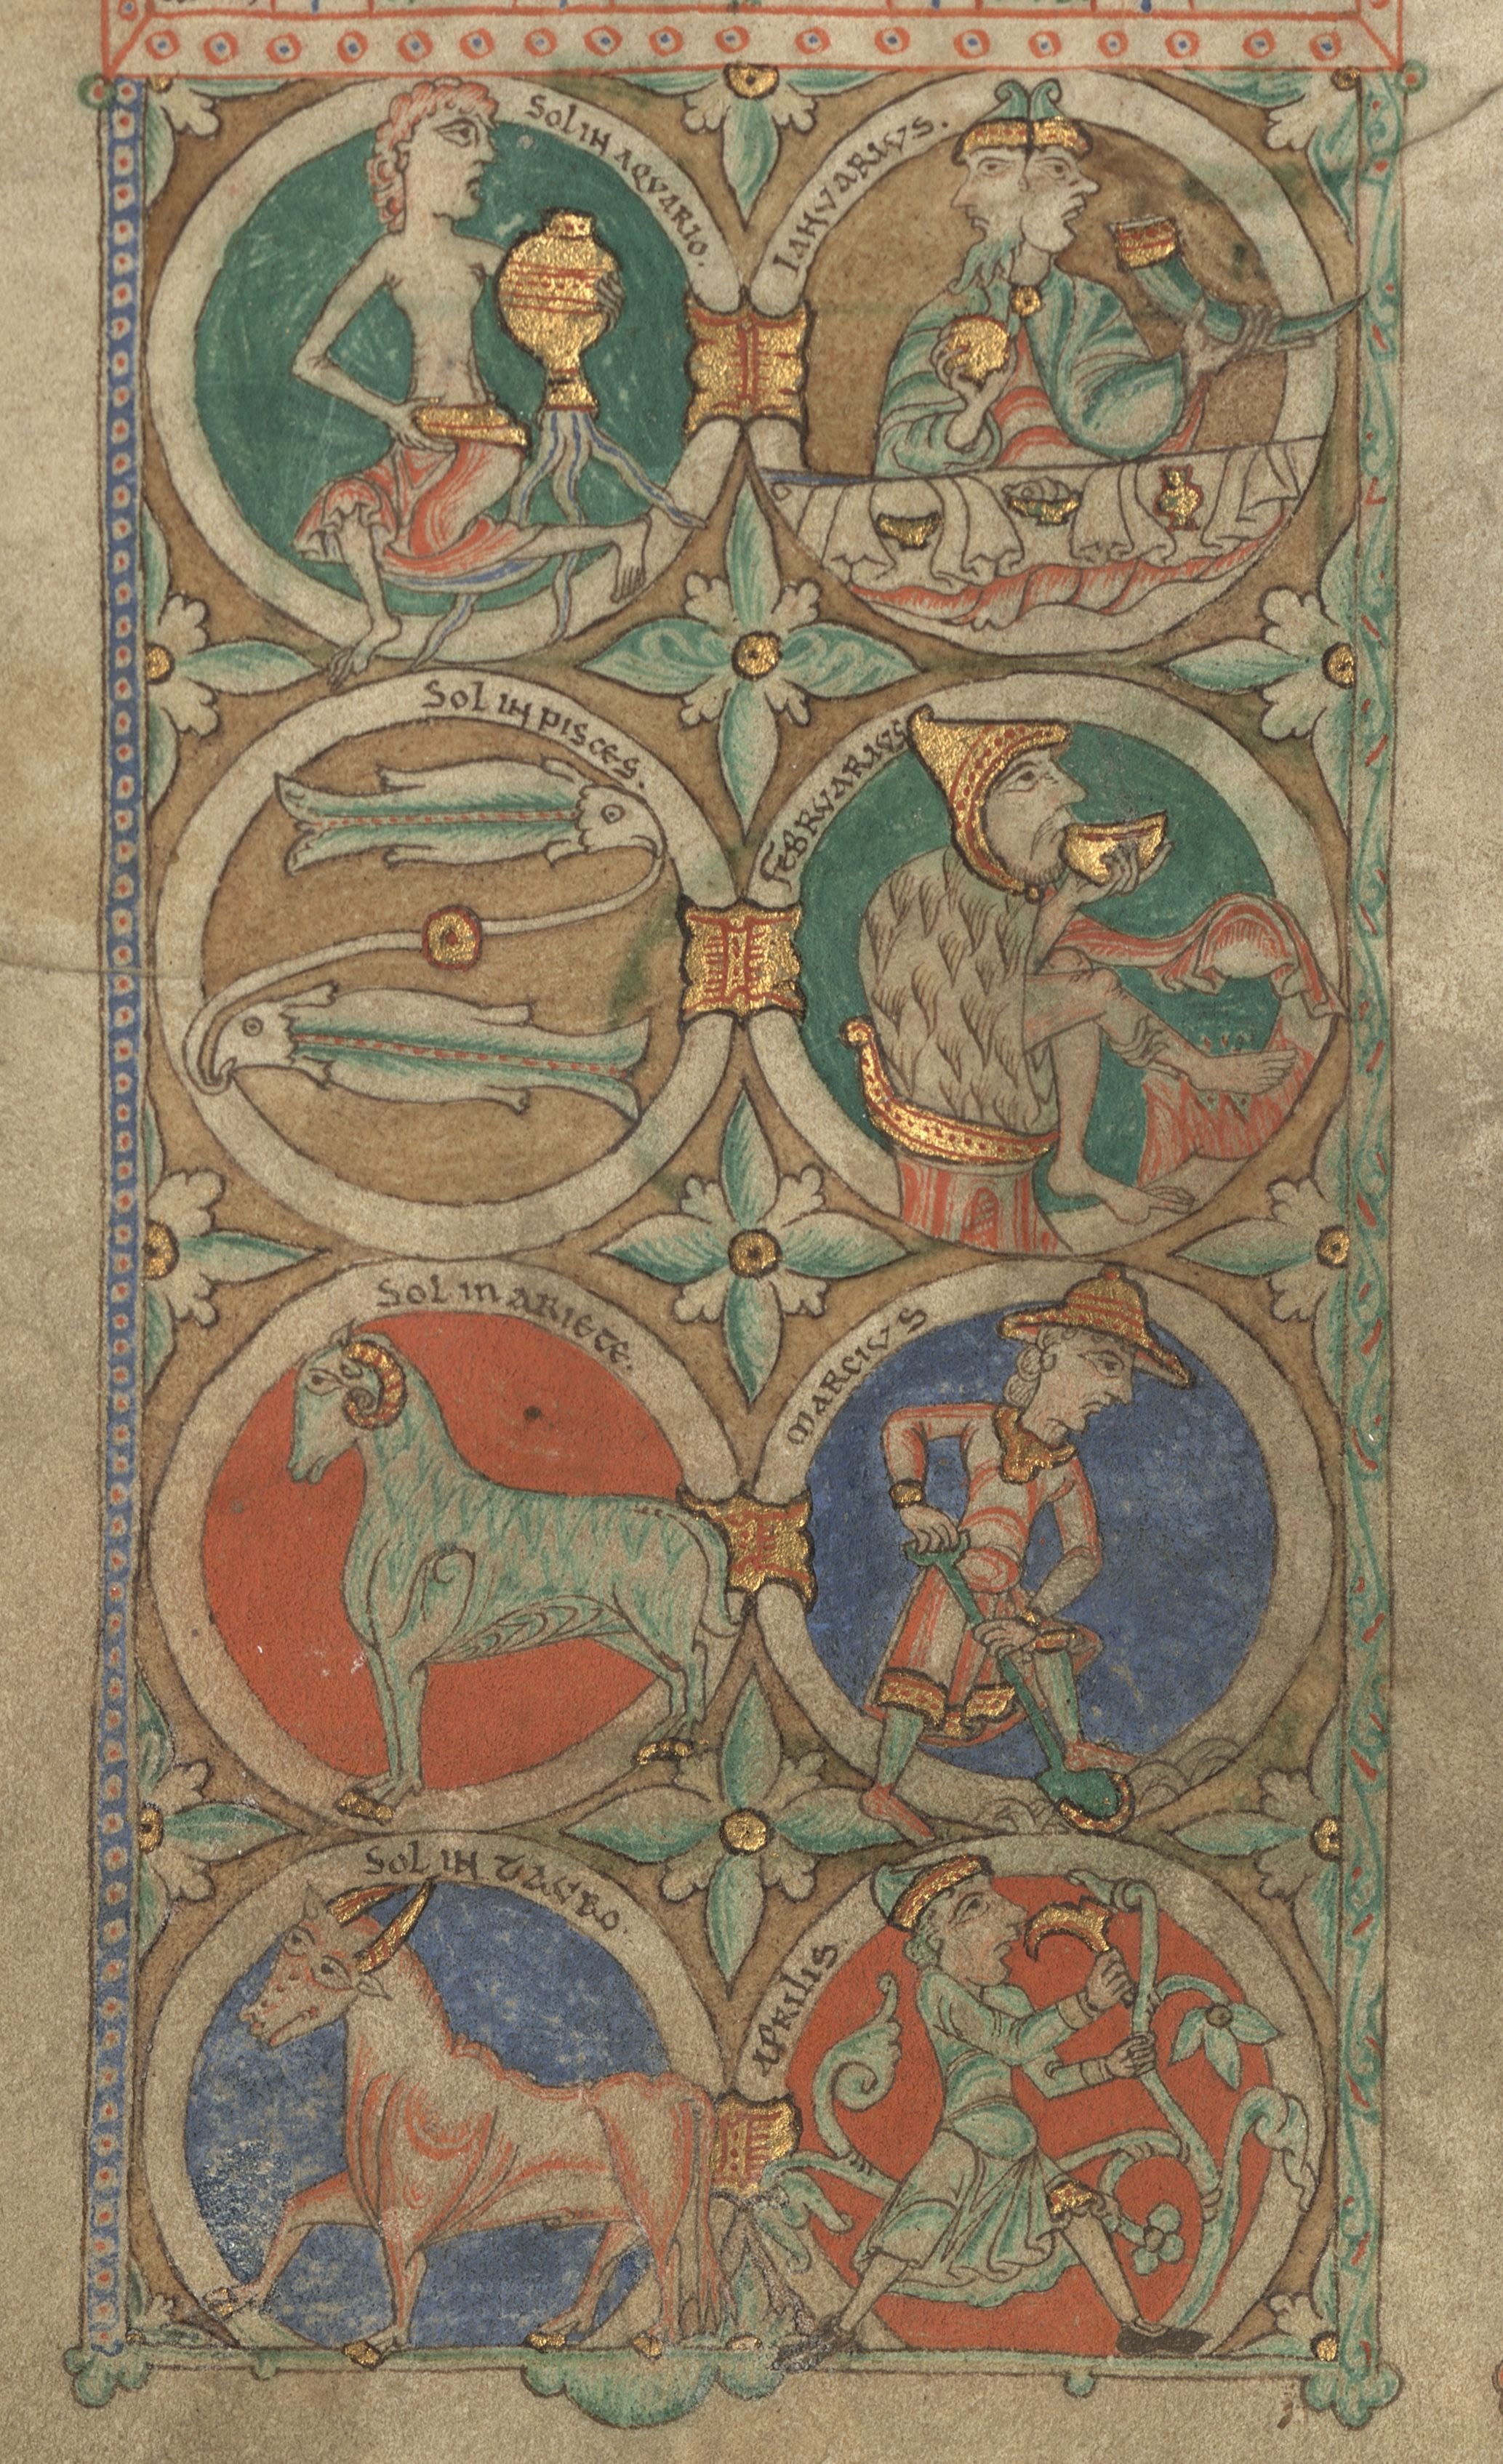 Detail of Zodiac signs and monthly labours from St John's College manuscript B.20, folio 2v. By permission of the Master and Fellows of St John's College, Cambridge